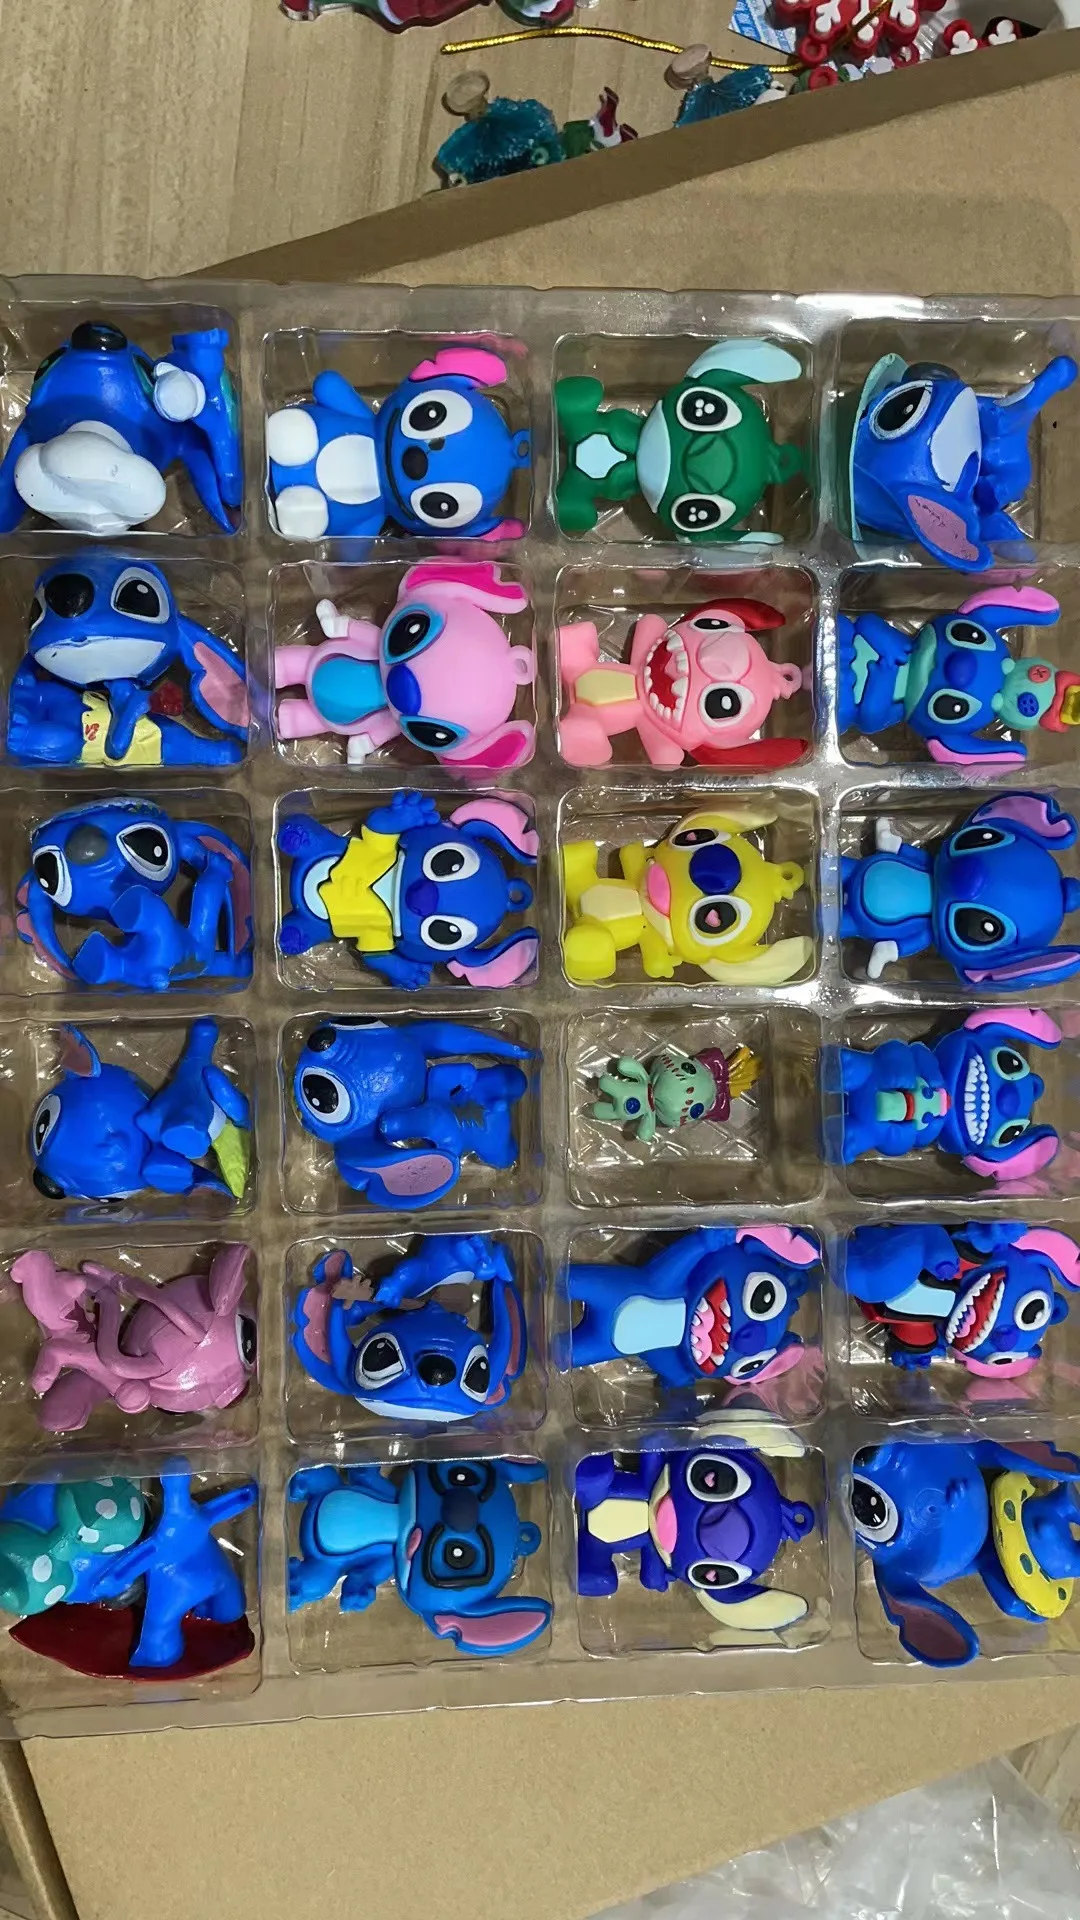 Christmas 24pcs Stitch Blind Box Toy Figures Anime PVC Doll Sets with Box Lilo & Stitch Blind Box Toys for Kids decoration